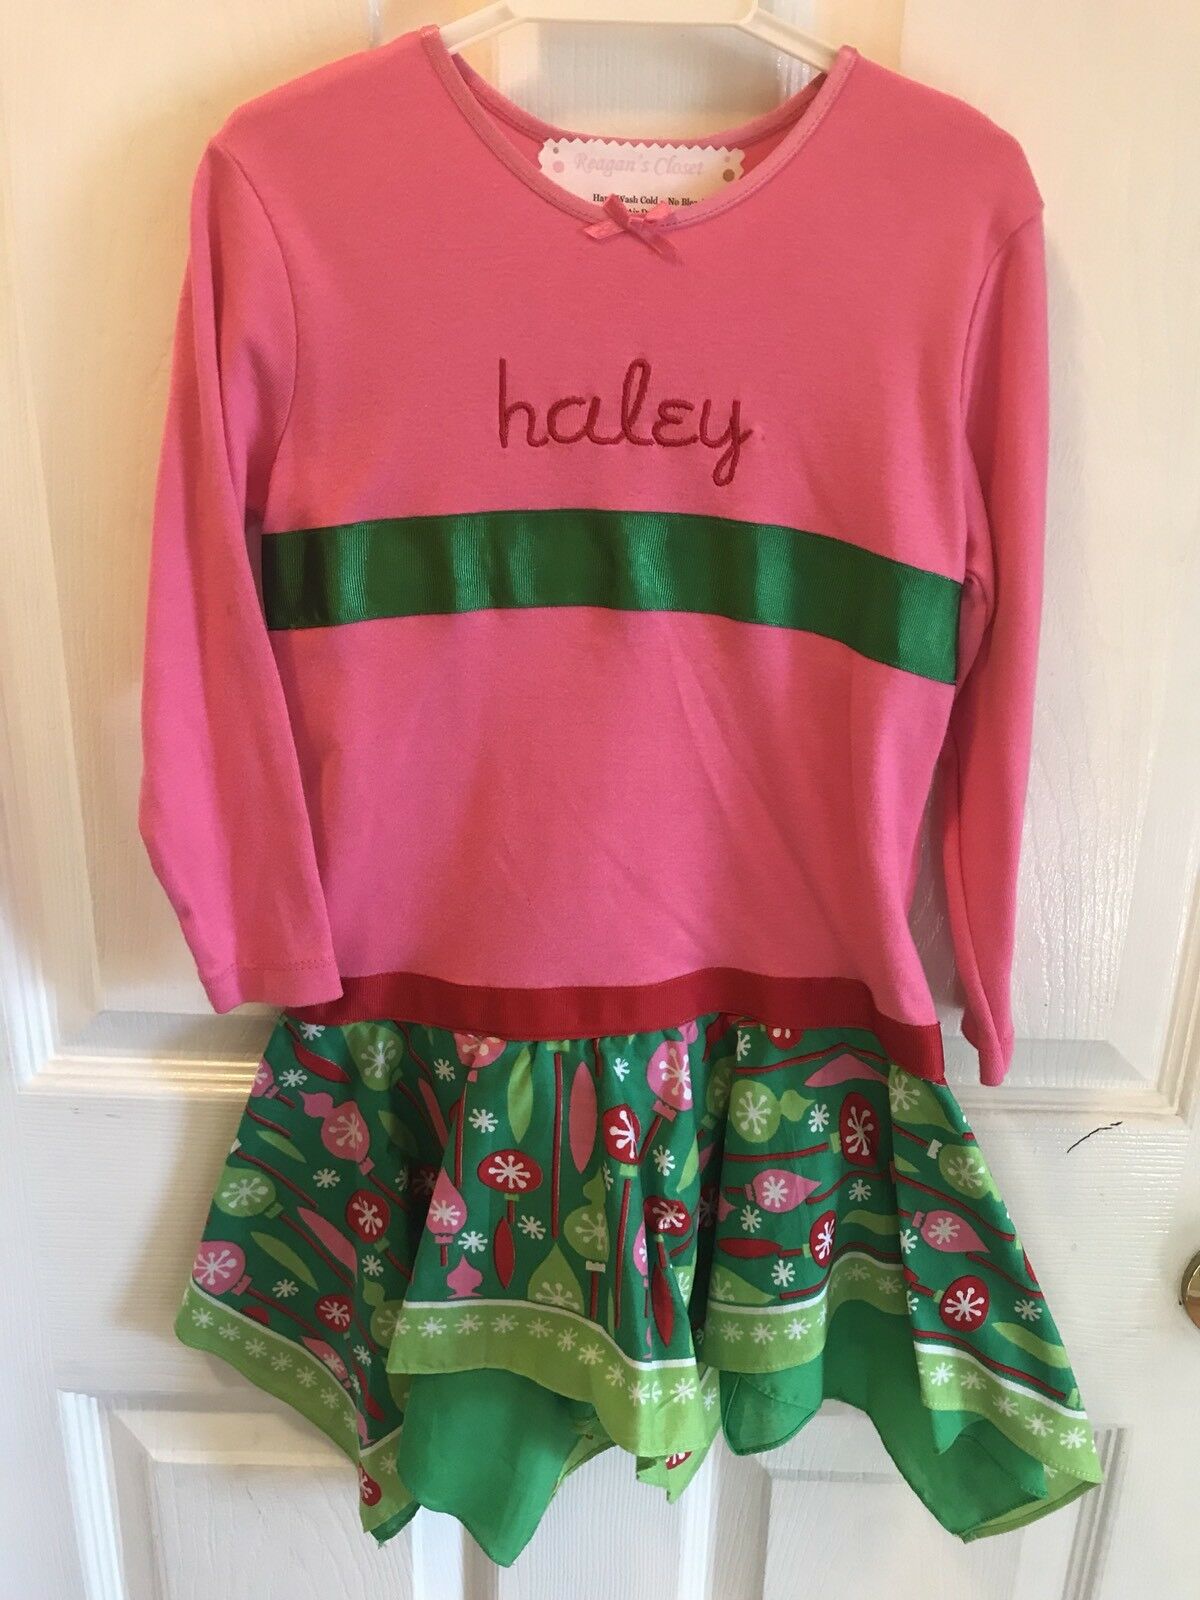 Handmade Embroidered Personalized  “haley” Handkerchief Christmas Dress Size 3t